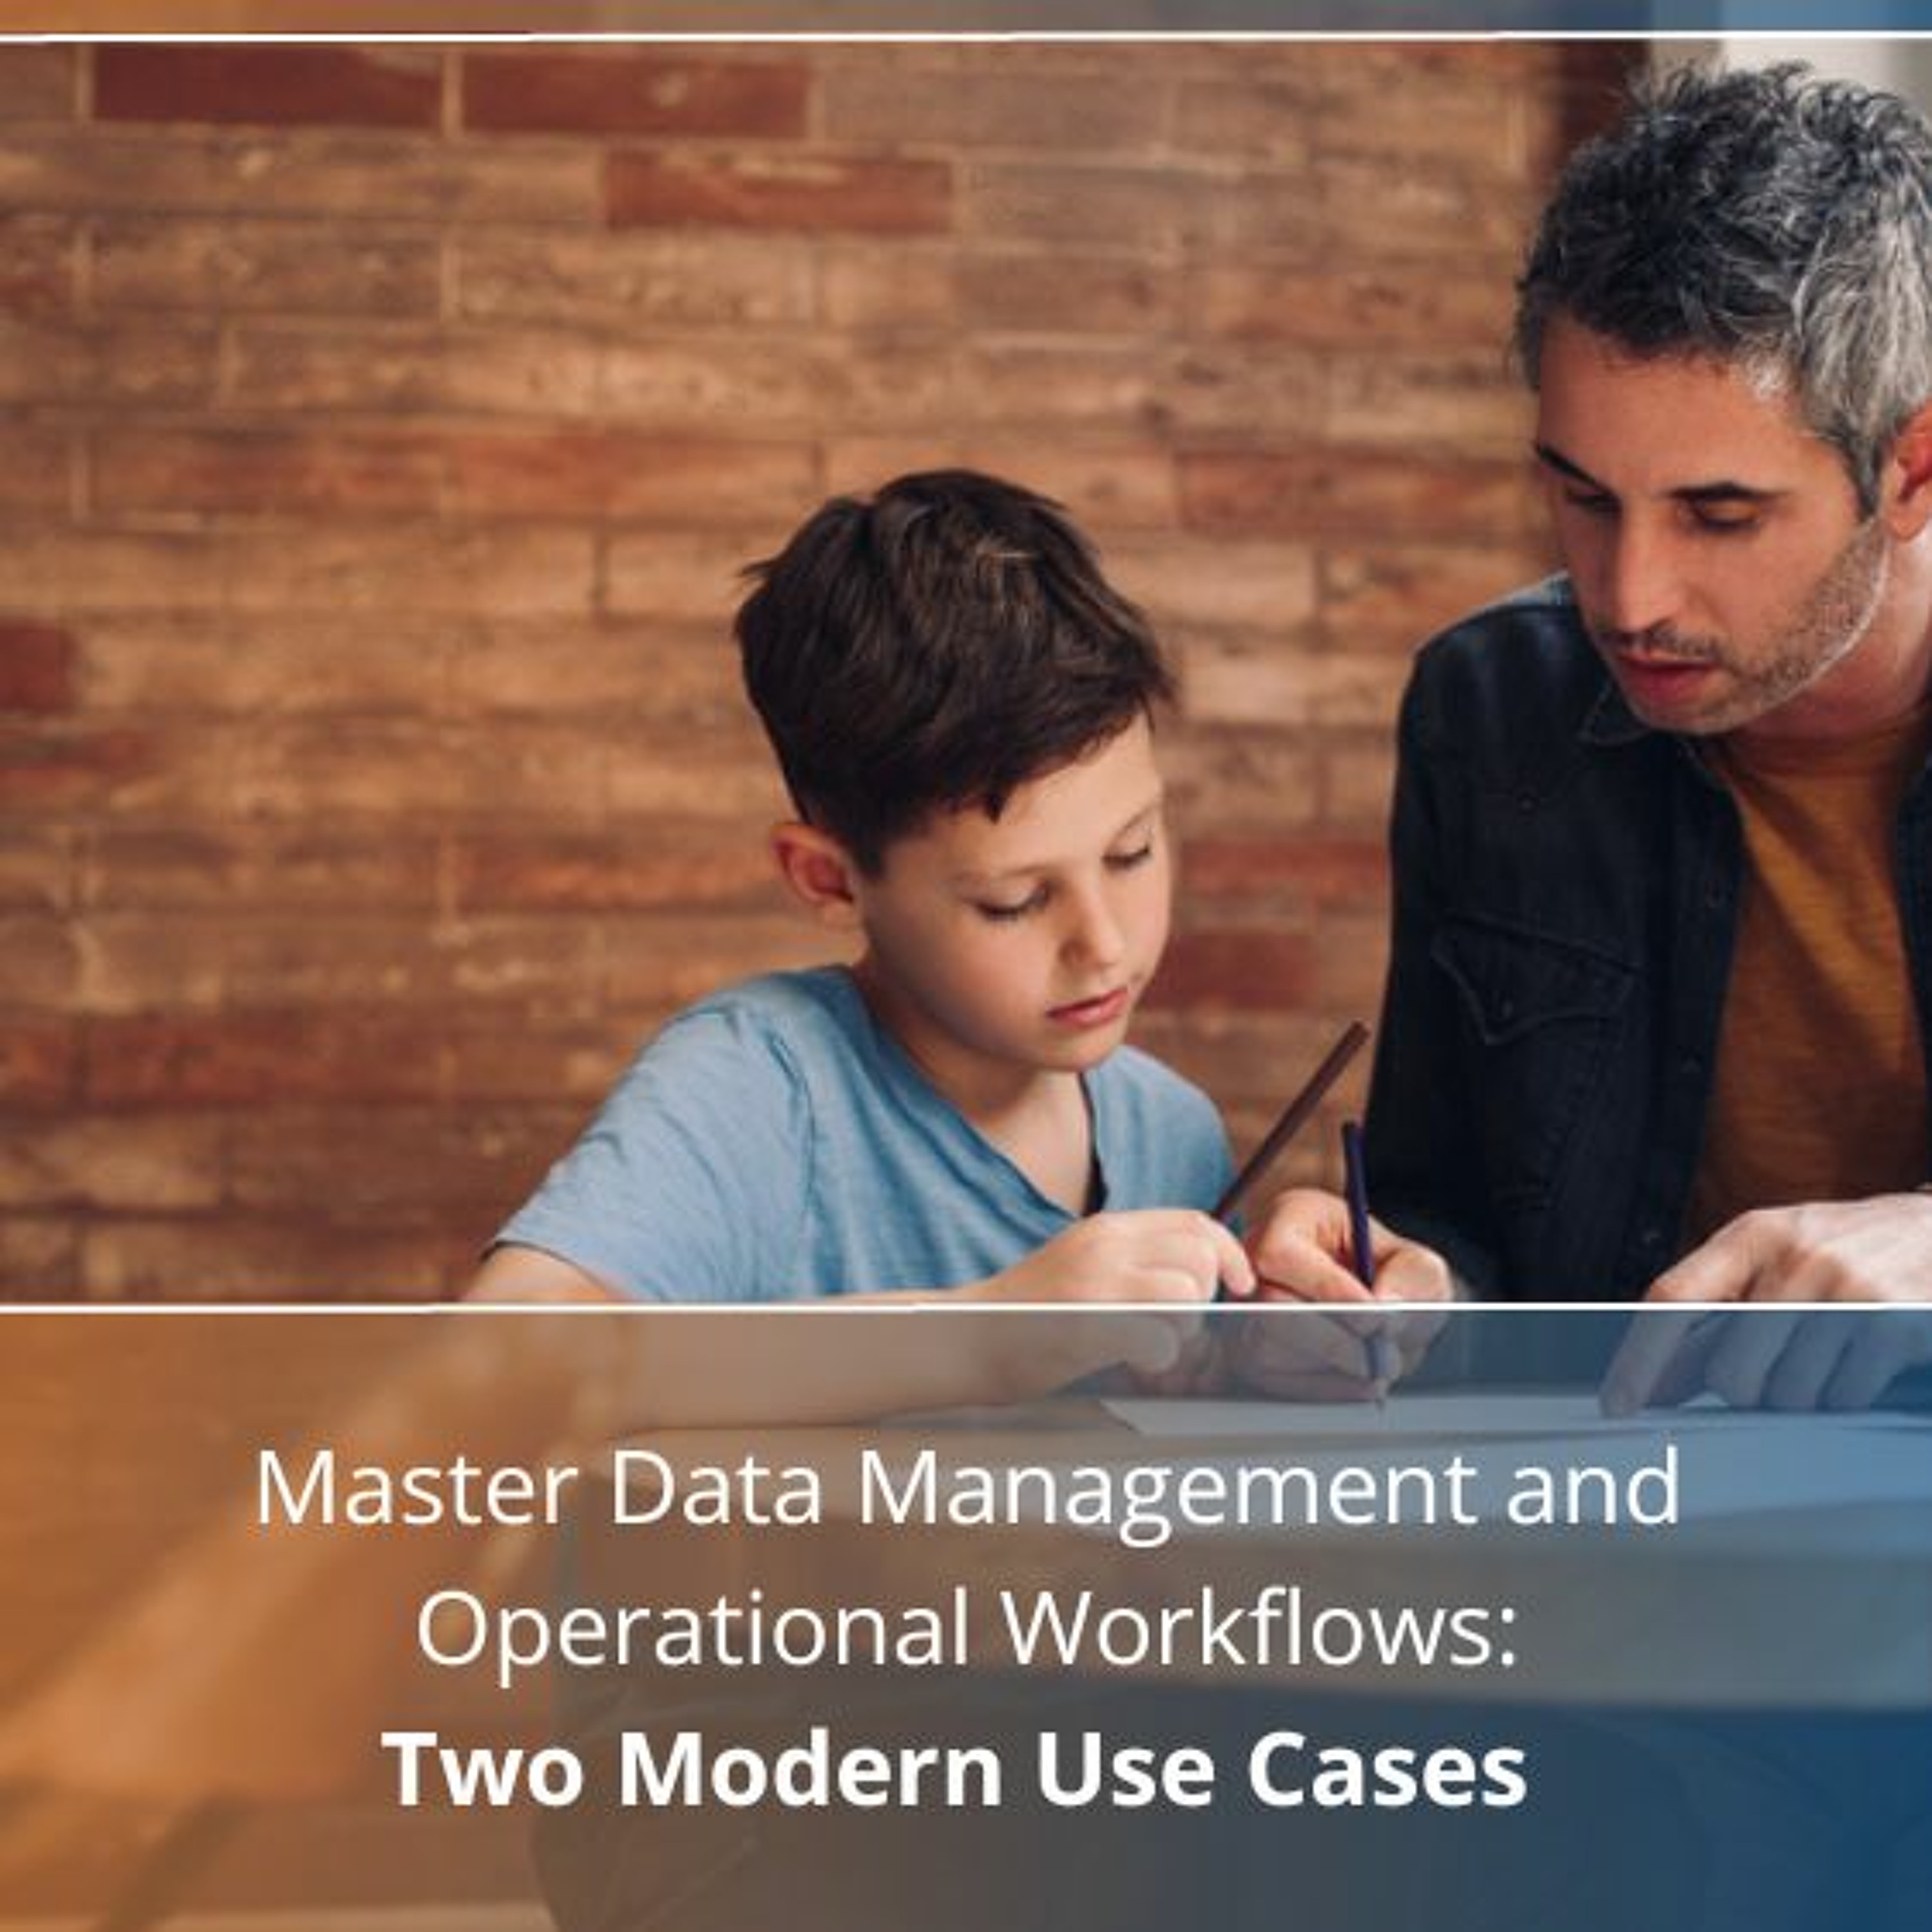 Master Data Management and Operational Workflows: Two Modern Use Cases